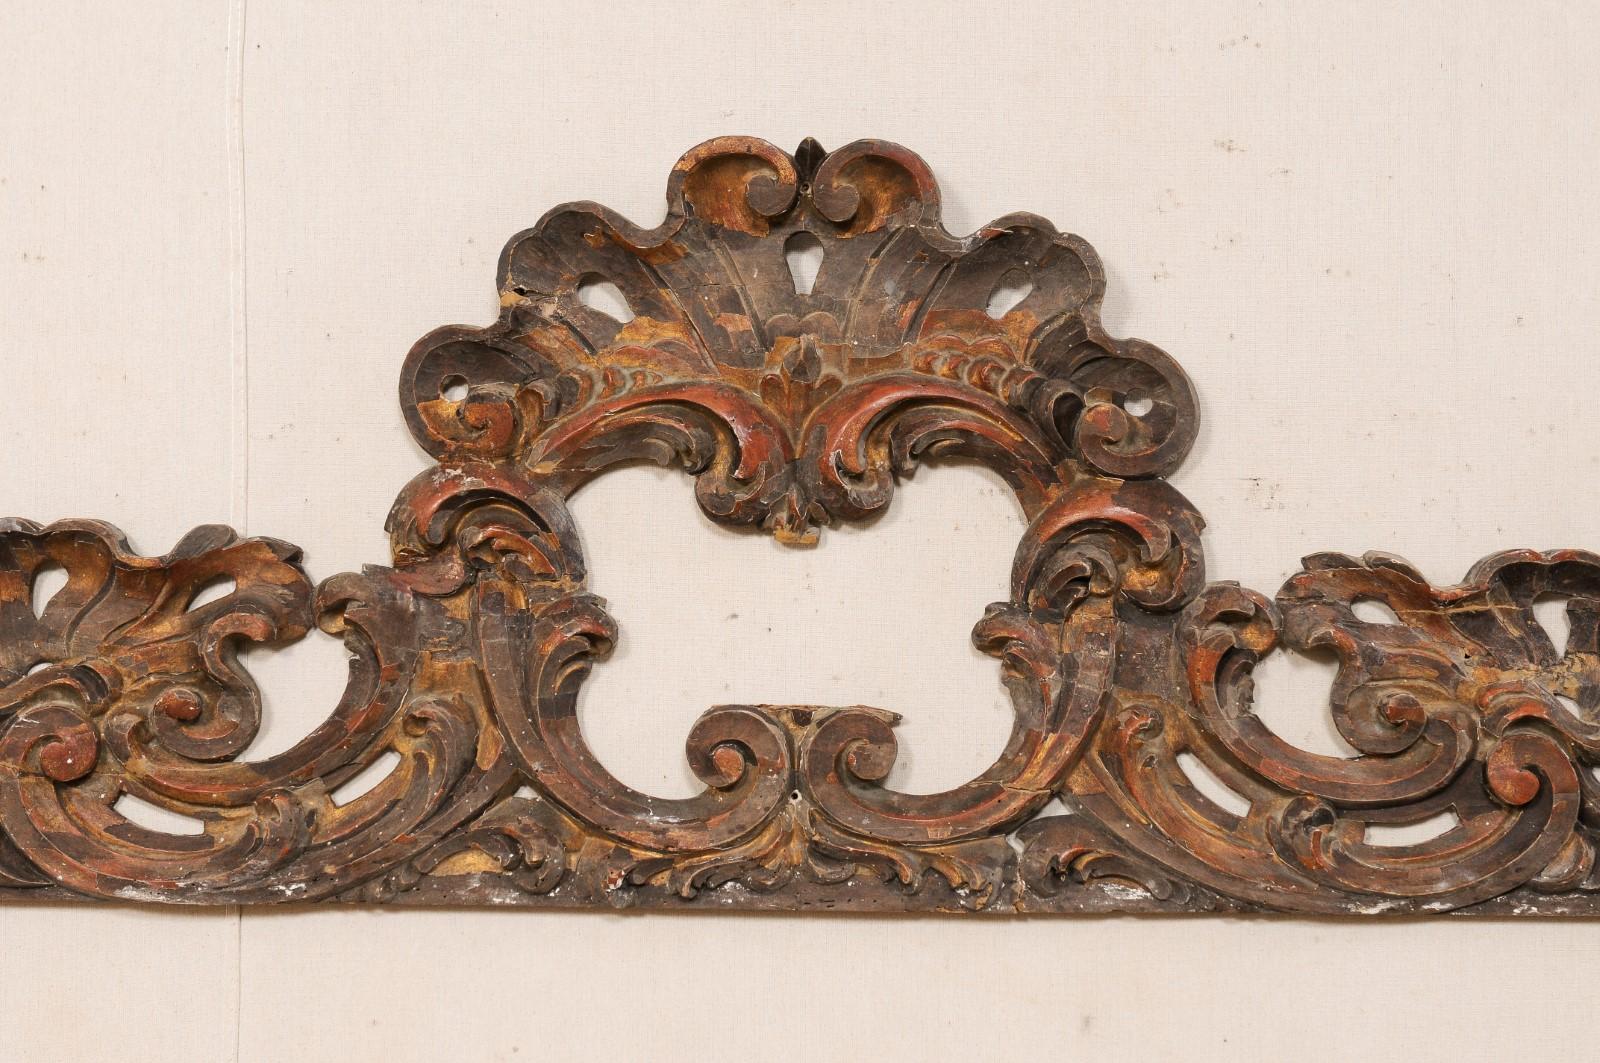 19th Century Late 18th Century Italian Pierce-Carved Wood Pediment Fragment For Sale